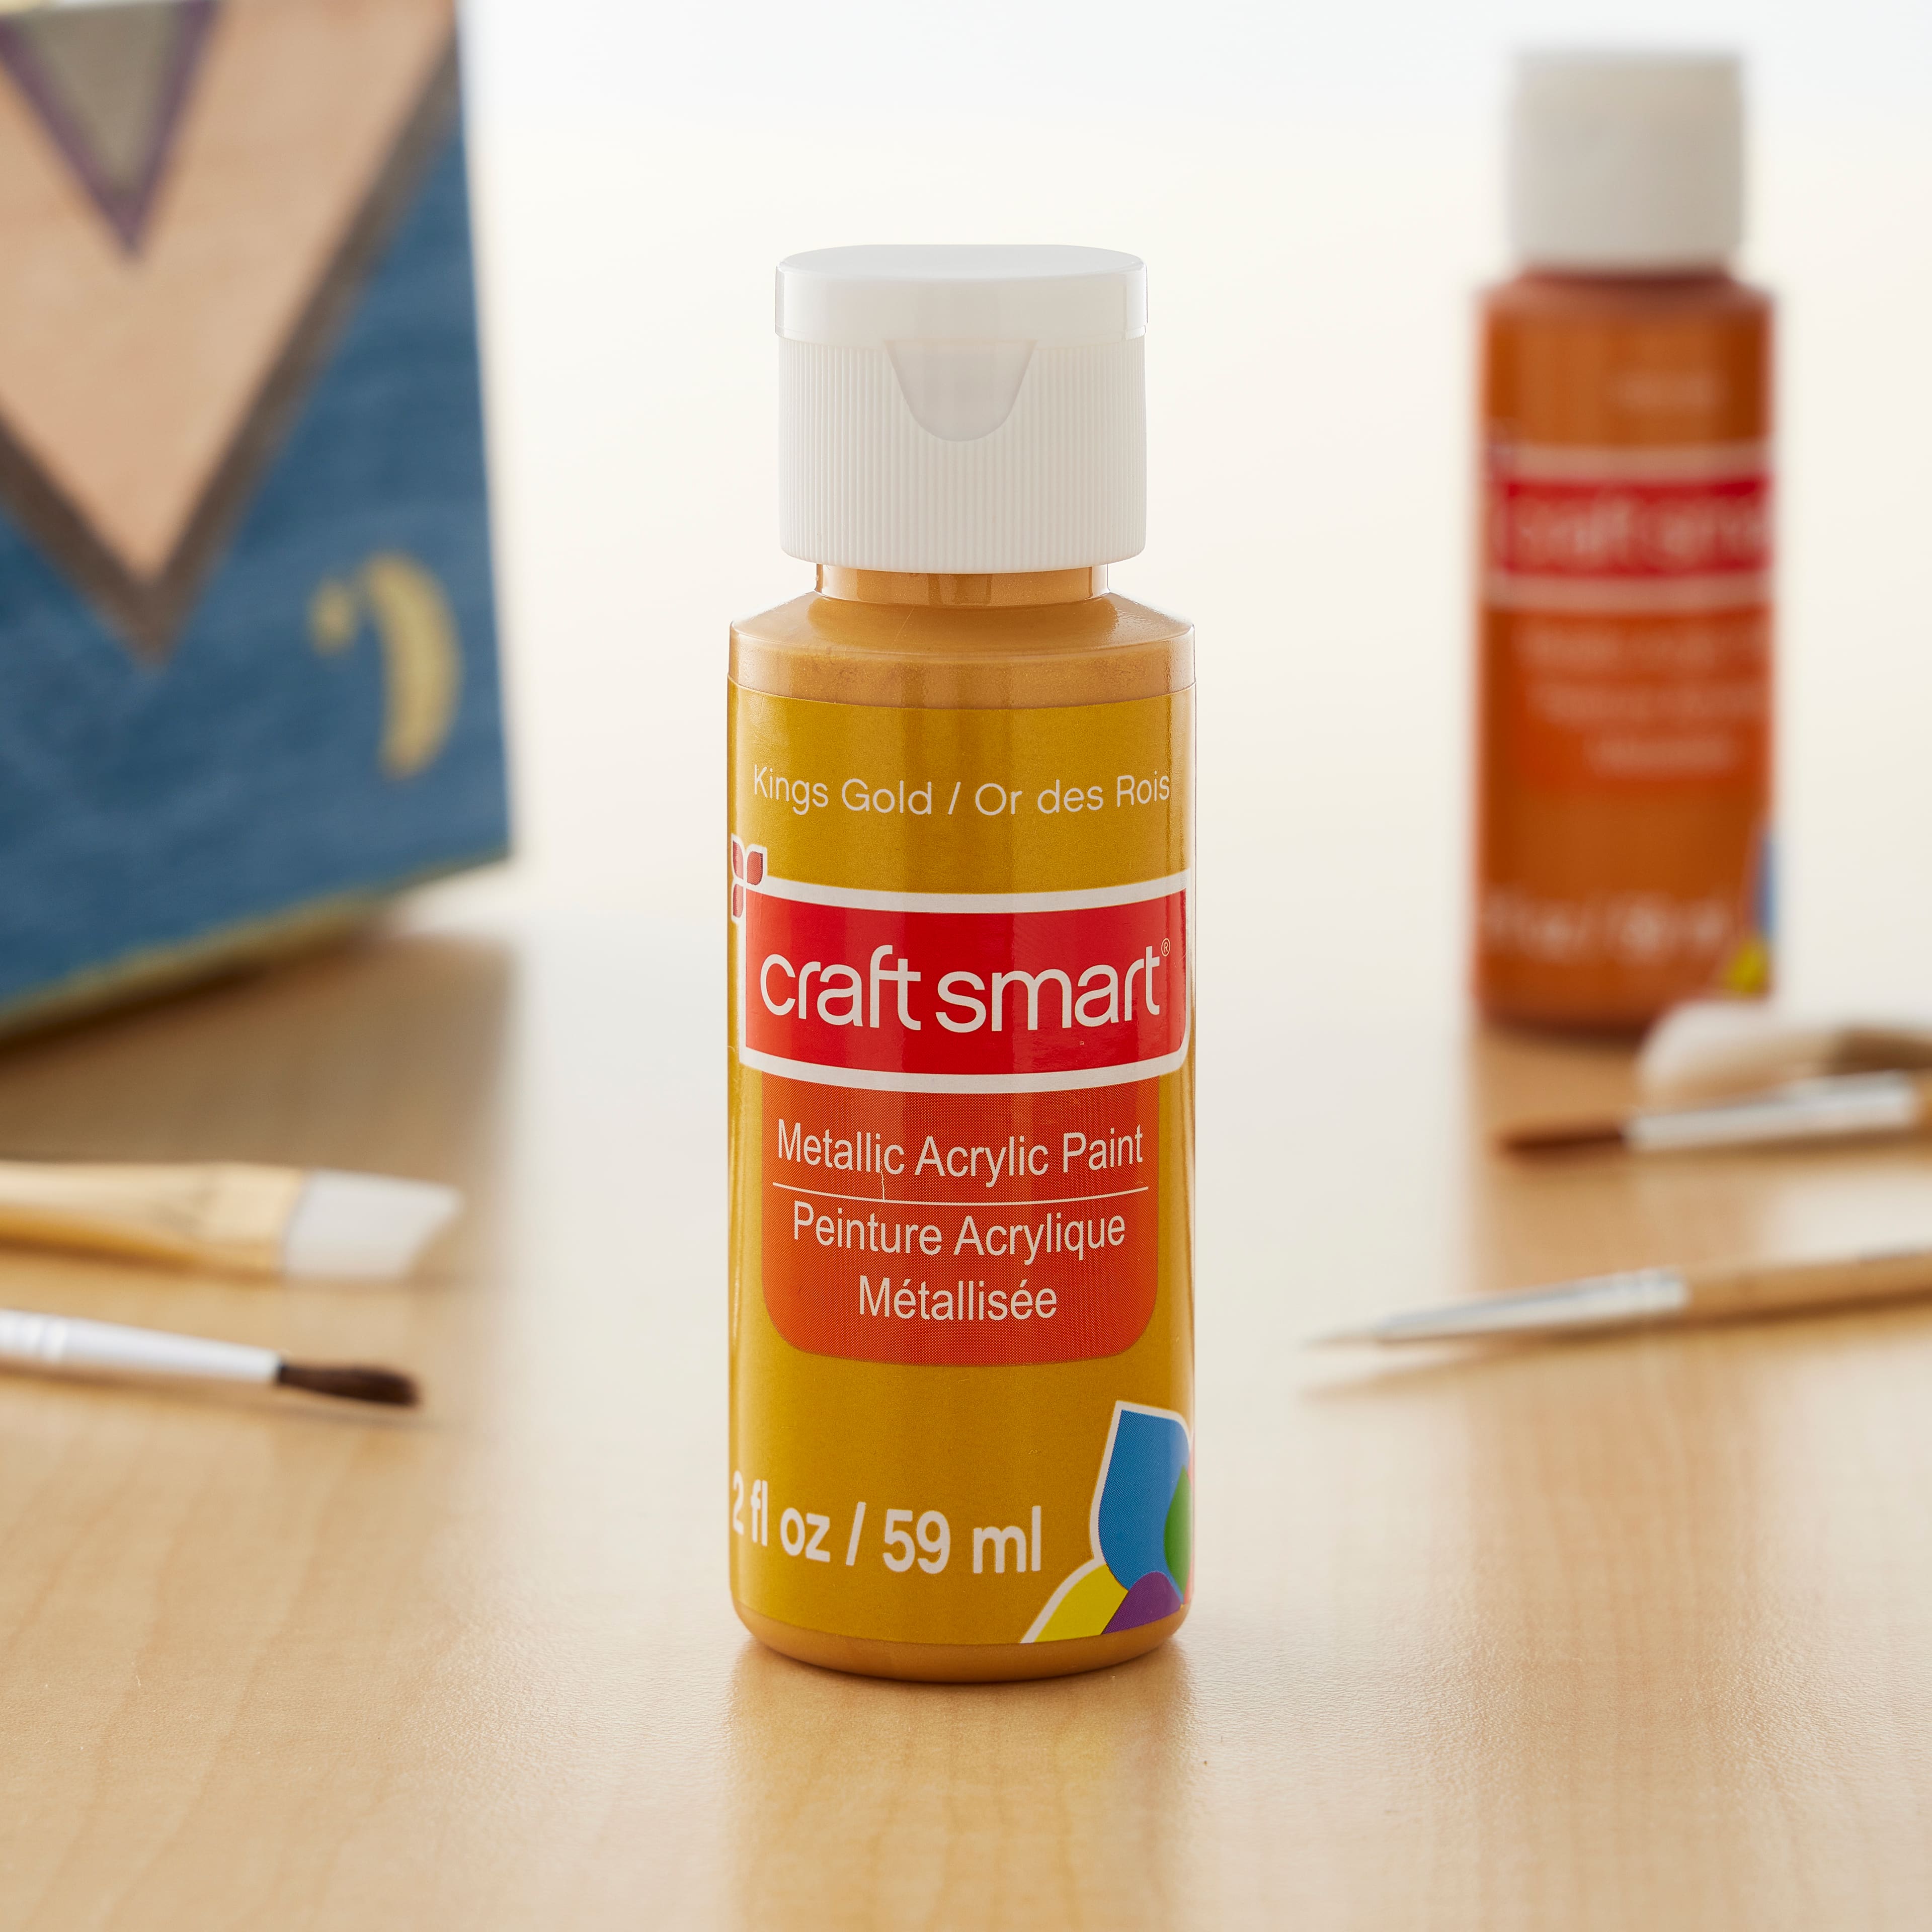 12 Pack: Metallic Paint by Craft Smart®, 2oz.